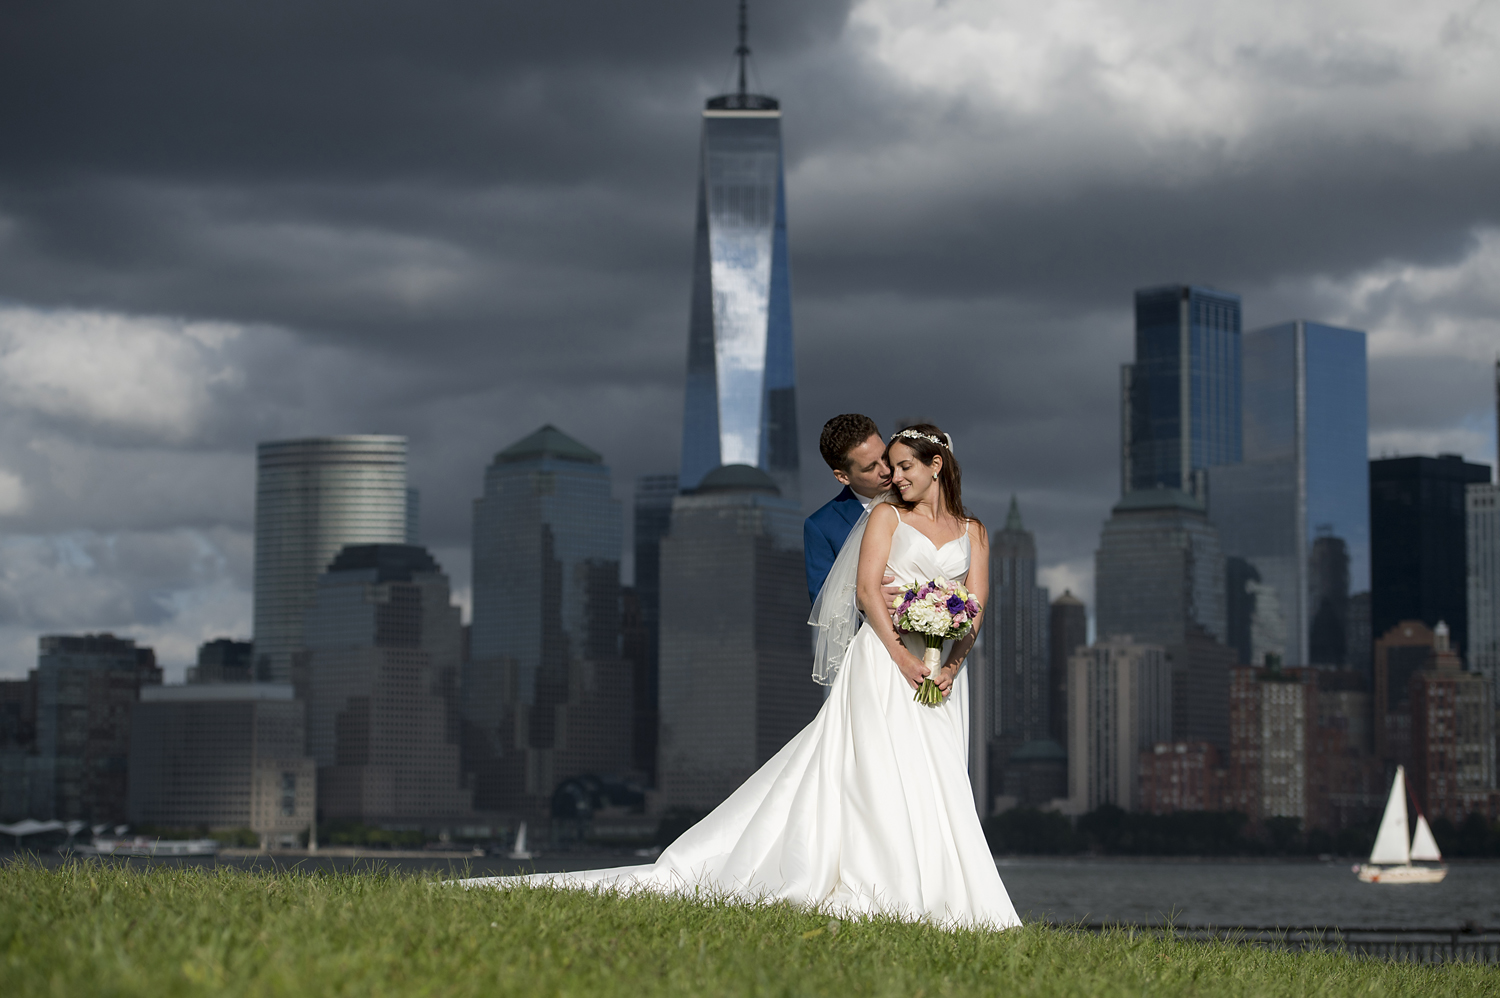 bride and groom posing for a portrait againt the NYC skyline before their micowedding ceremony at Liberty House in Jersey City. Jersey City wedding photographer